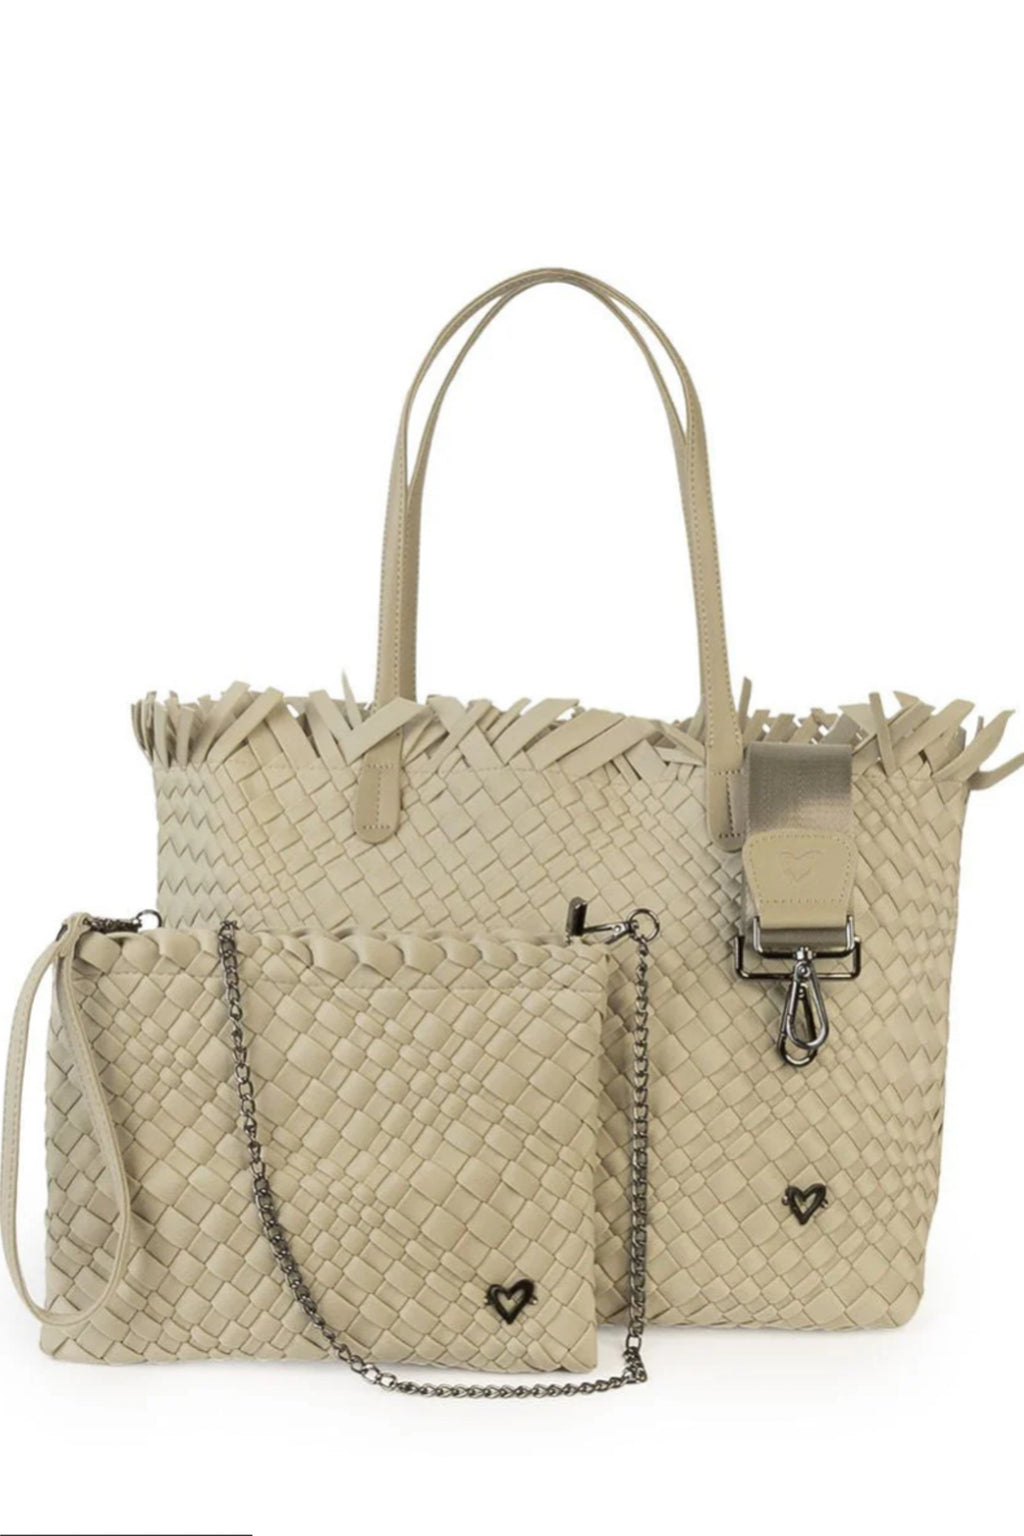 Vulcan Large Fringe Woven Tote